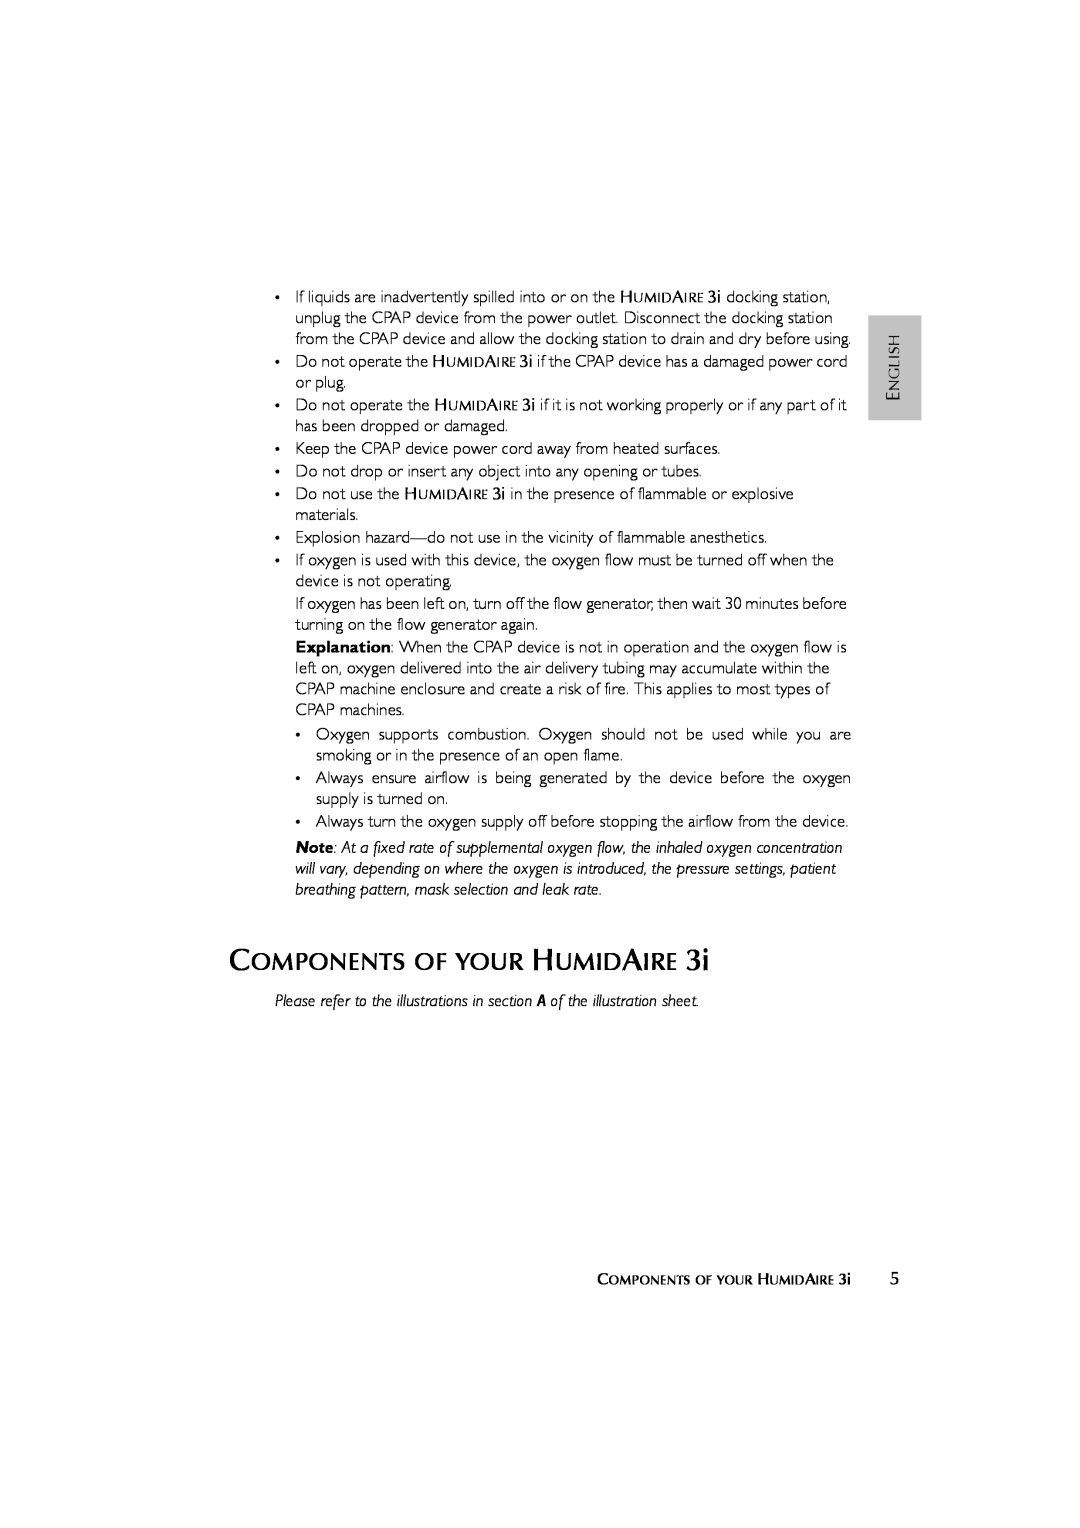 ResMed 3I user manual Components Of Your Humidaire, English 